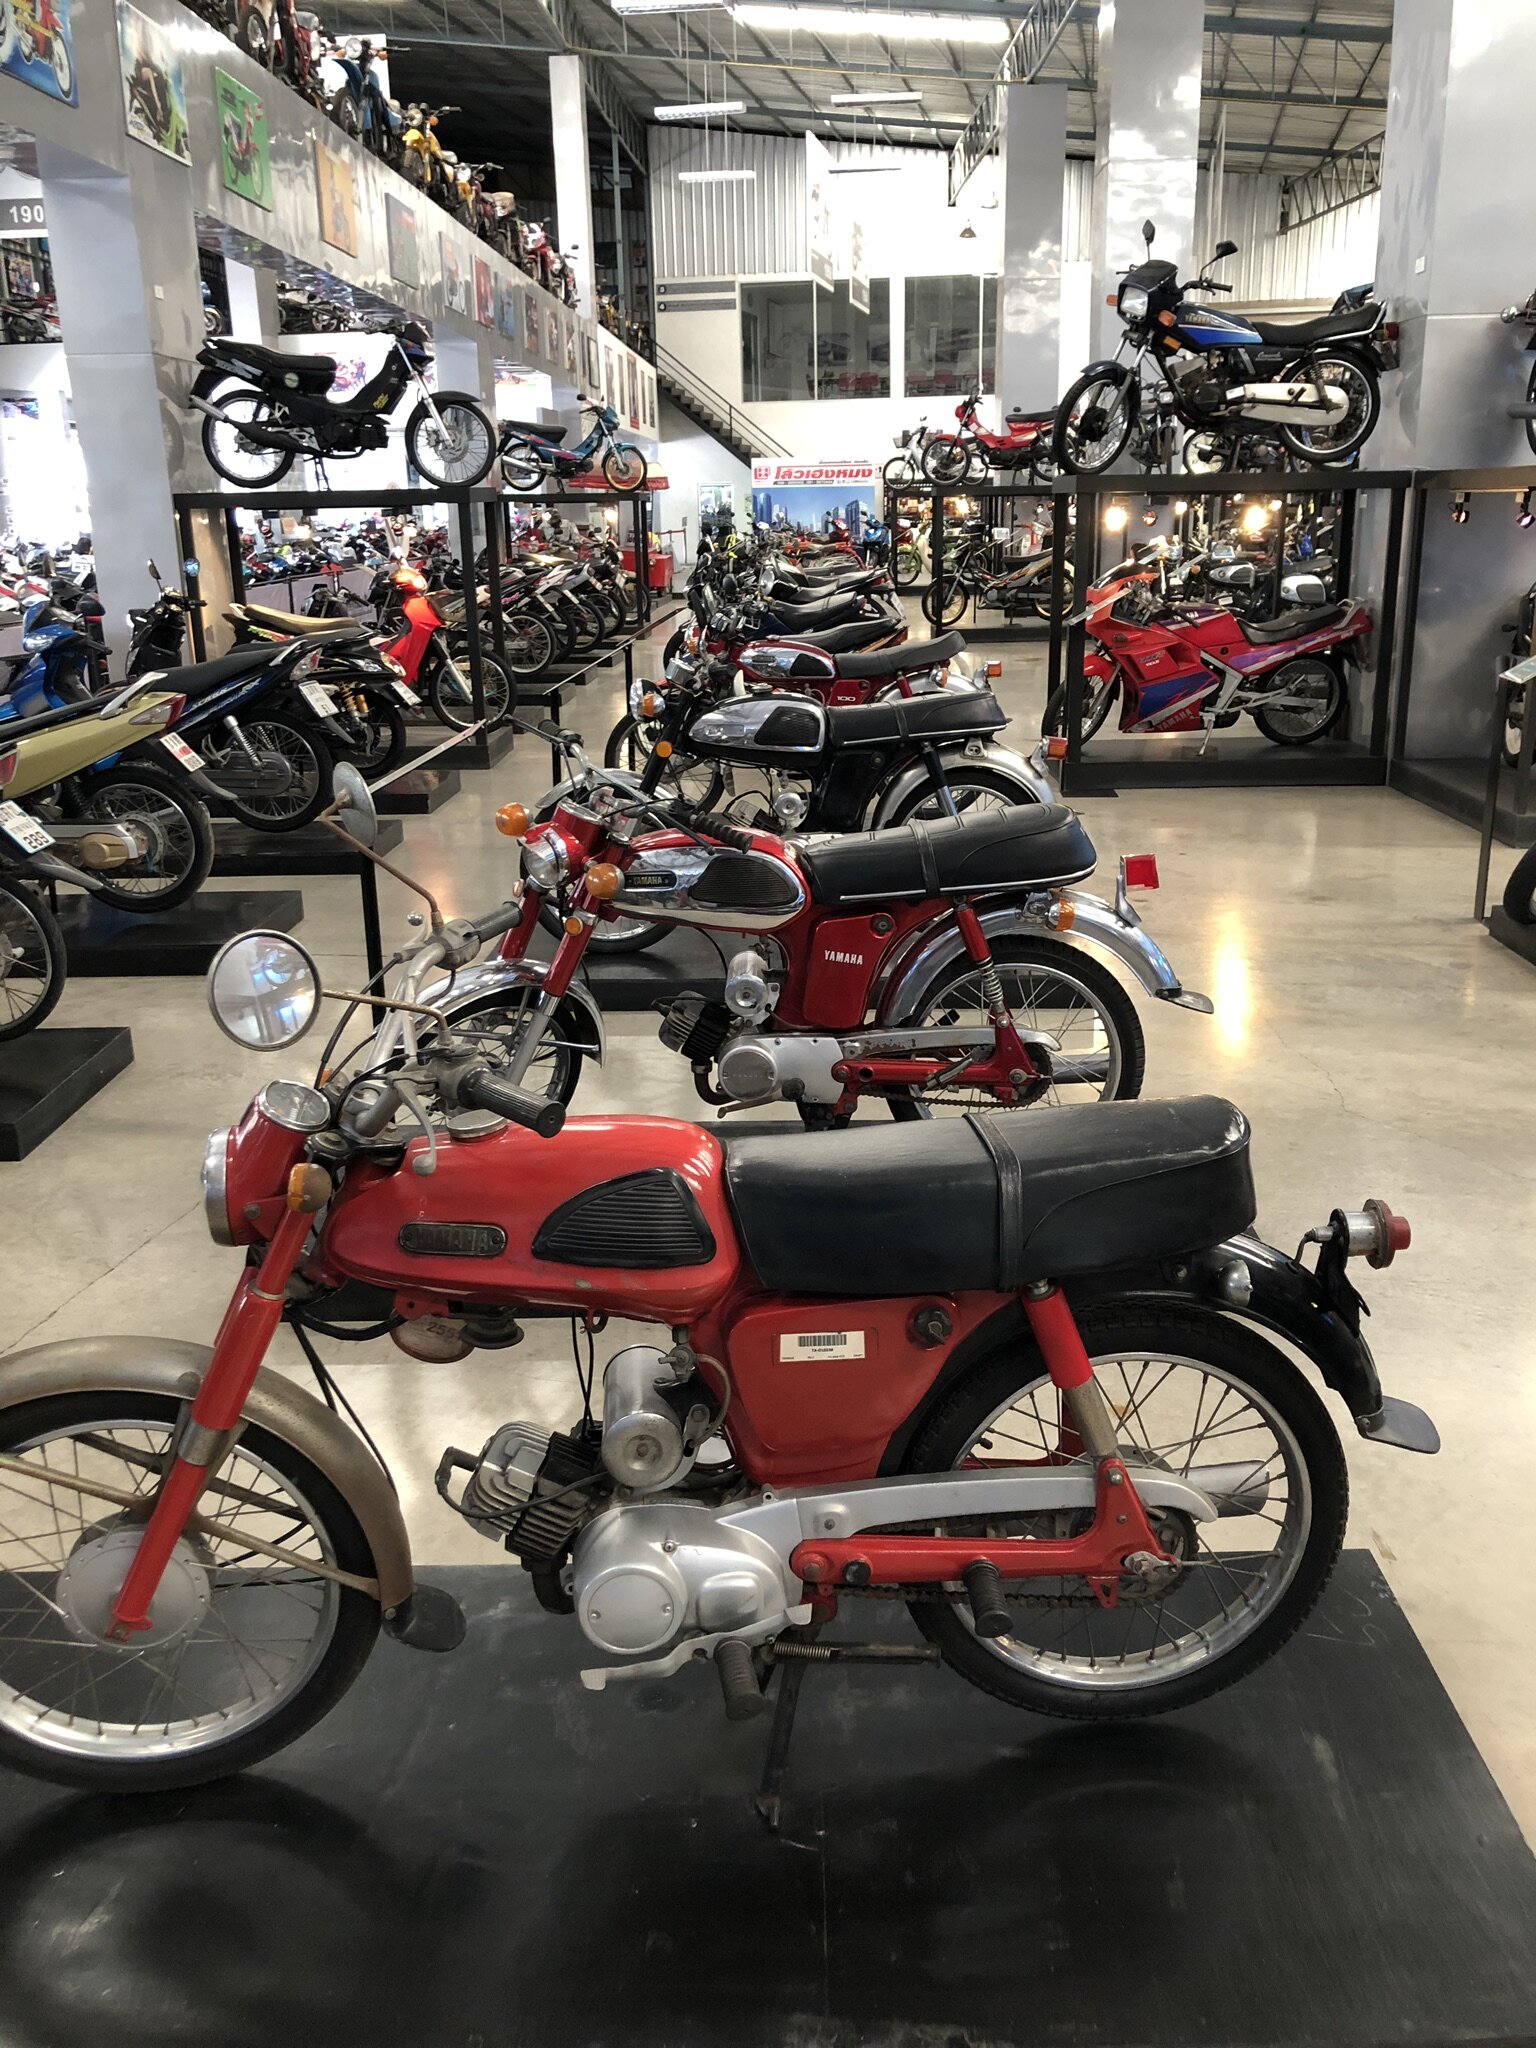 LHM Motorcycle Museum